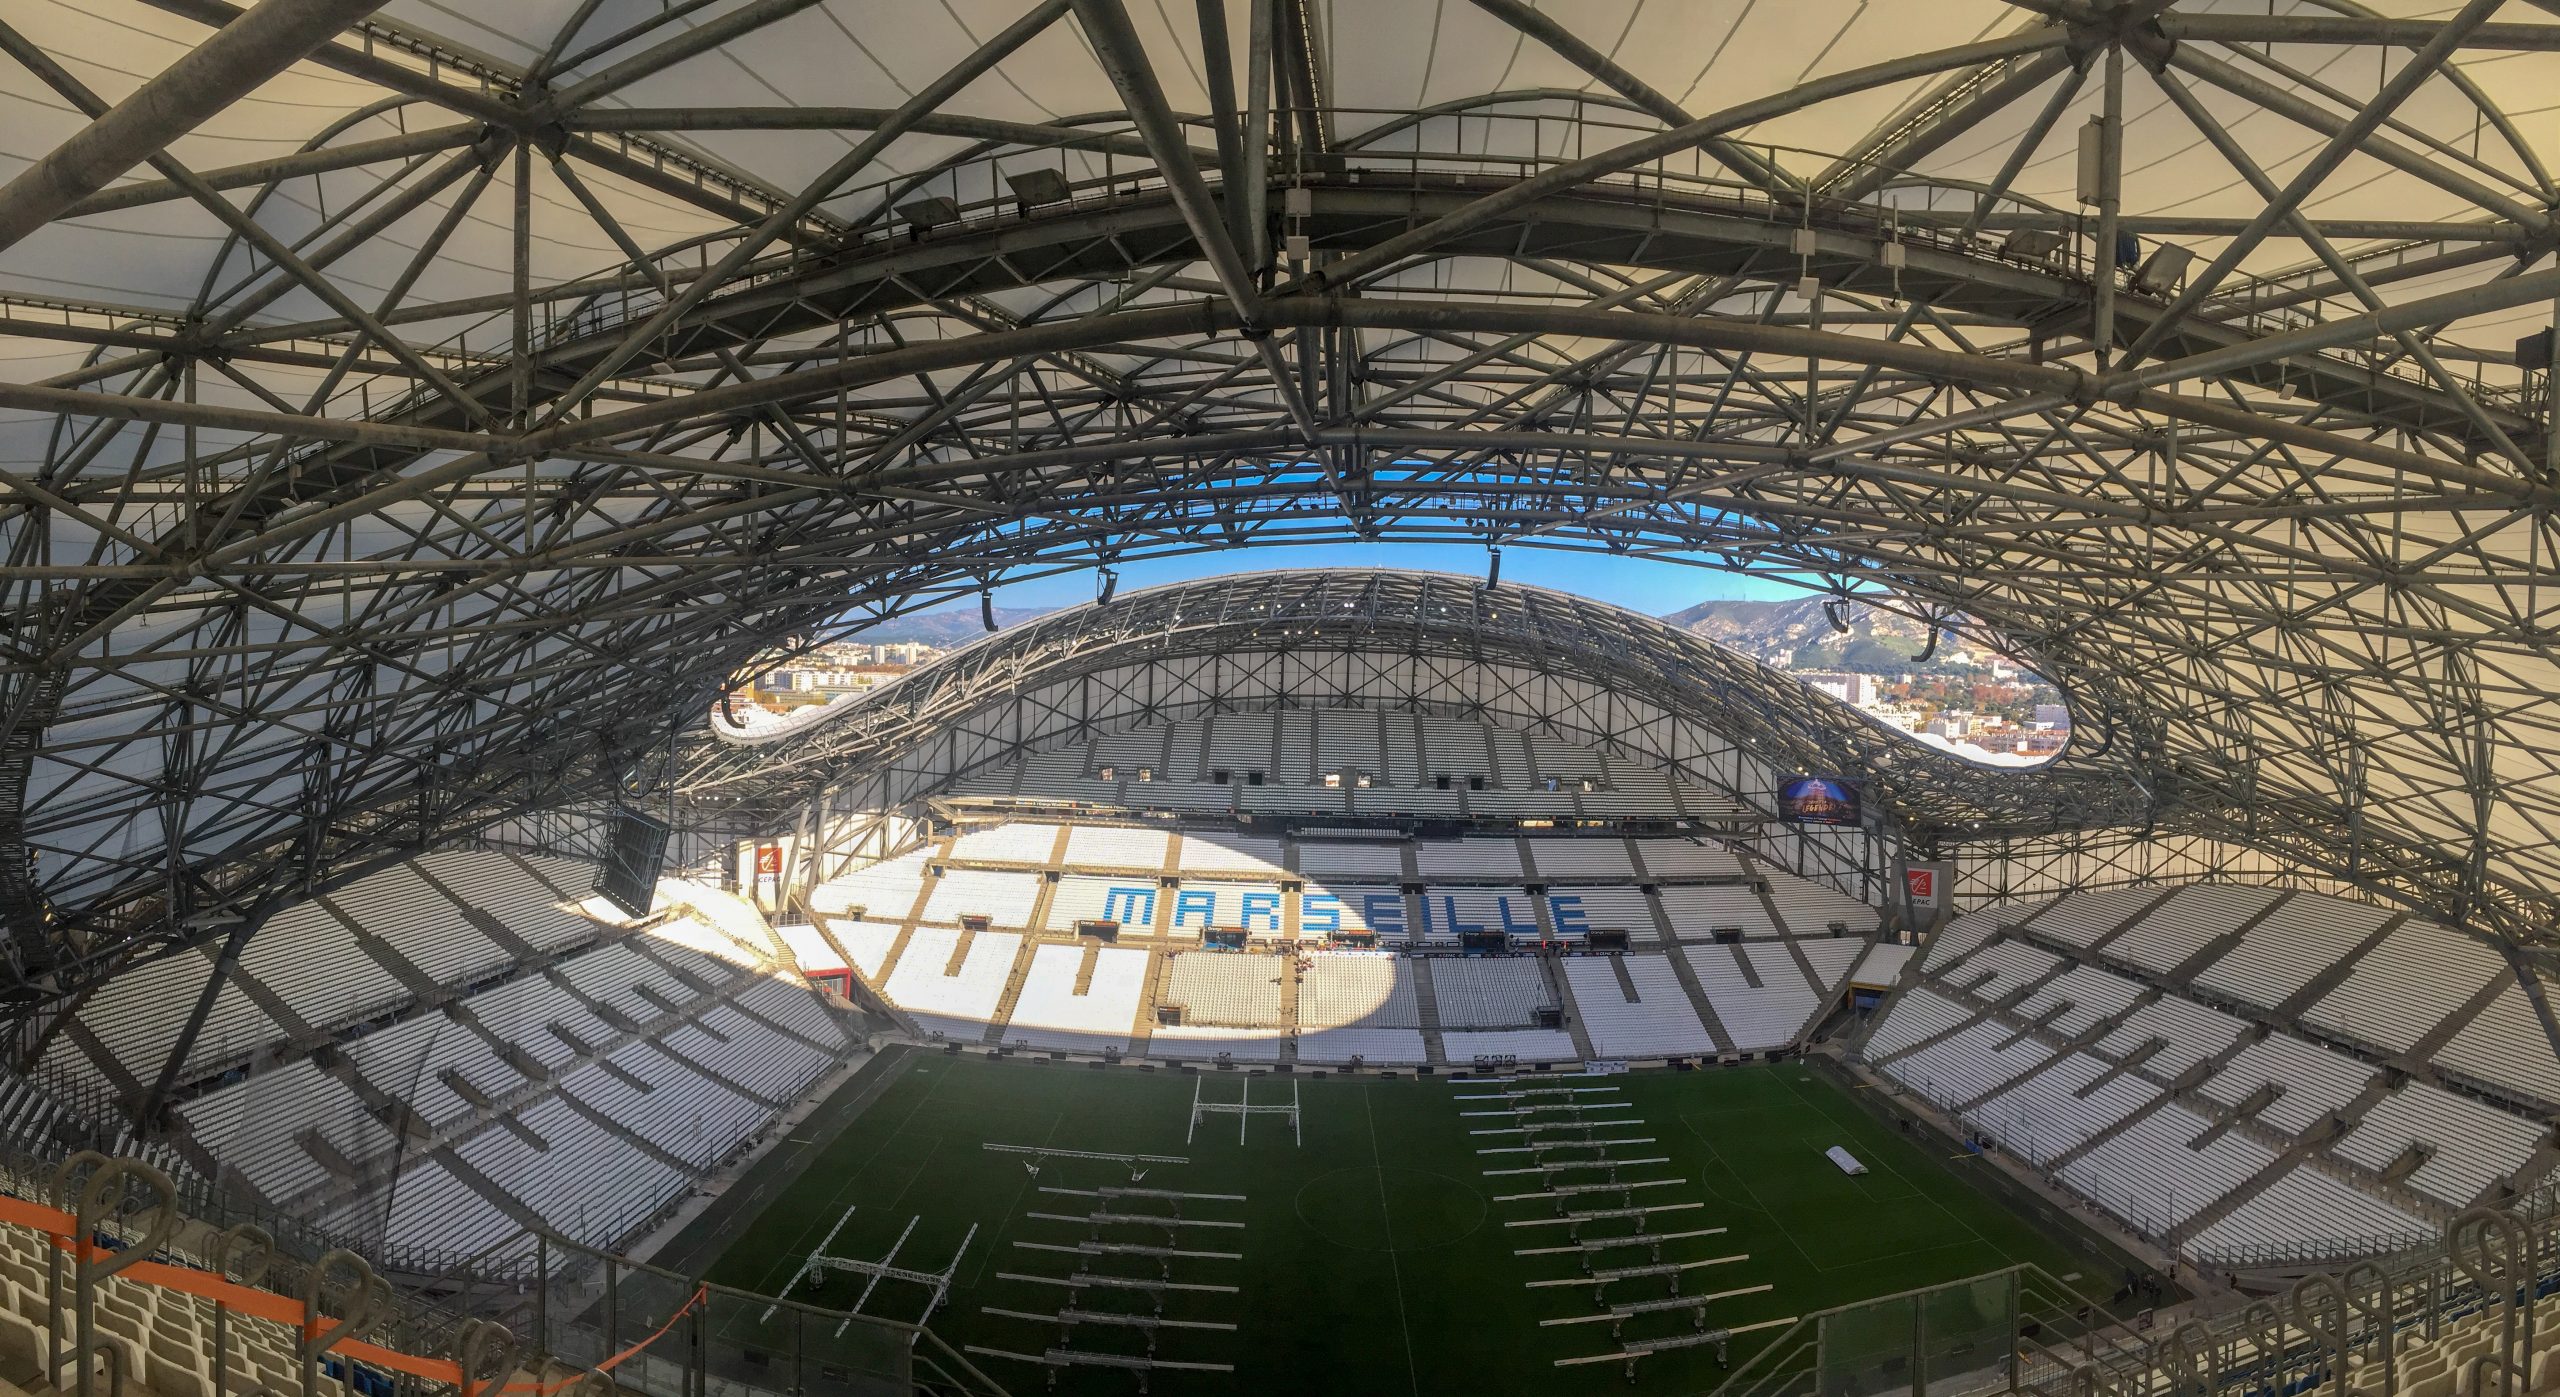 The Stade Vélodrome in Marseille, France